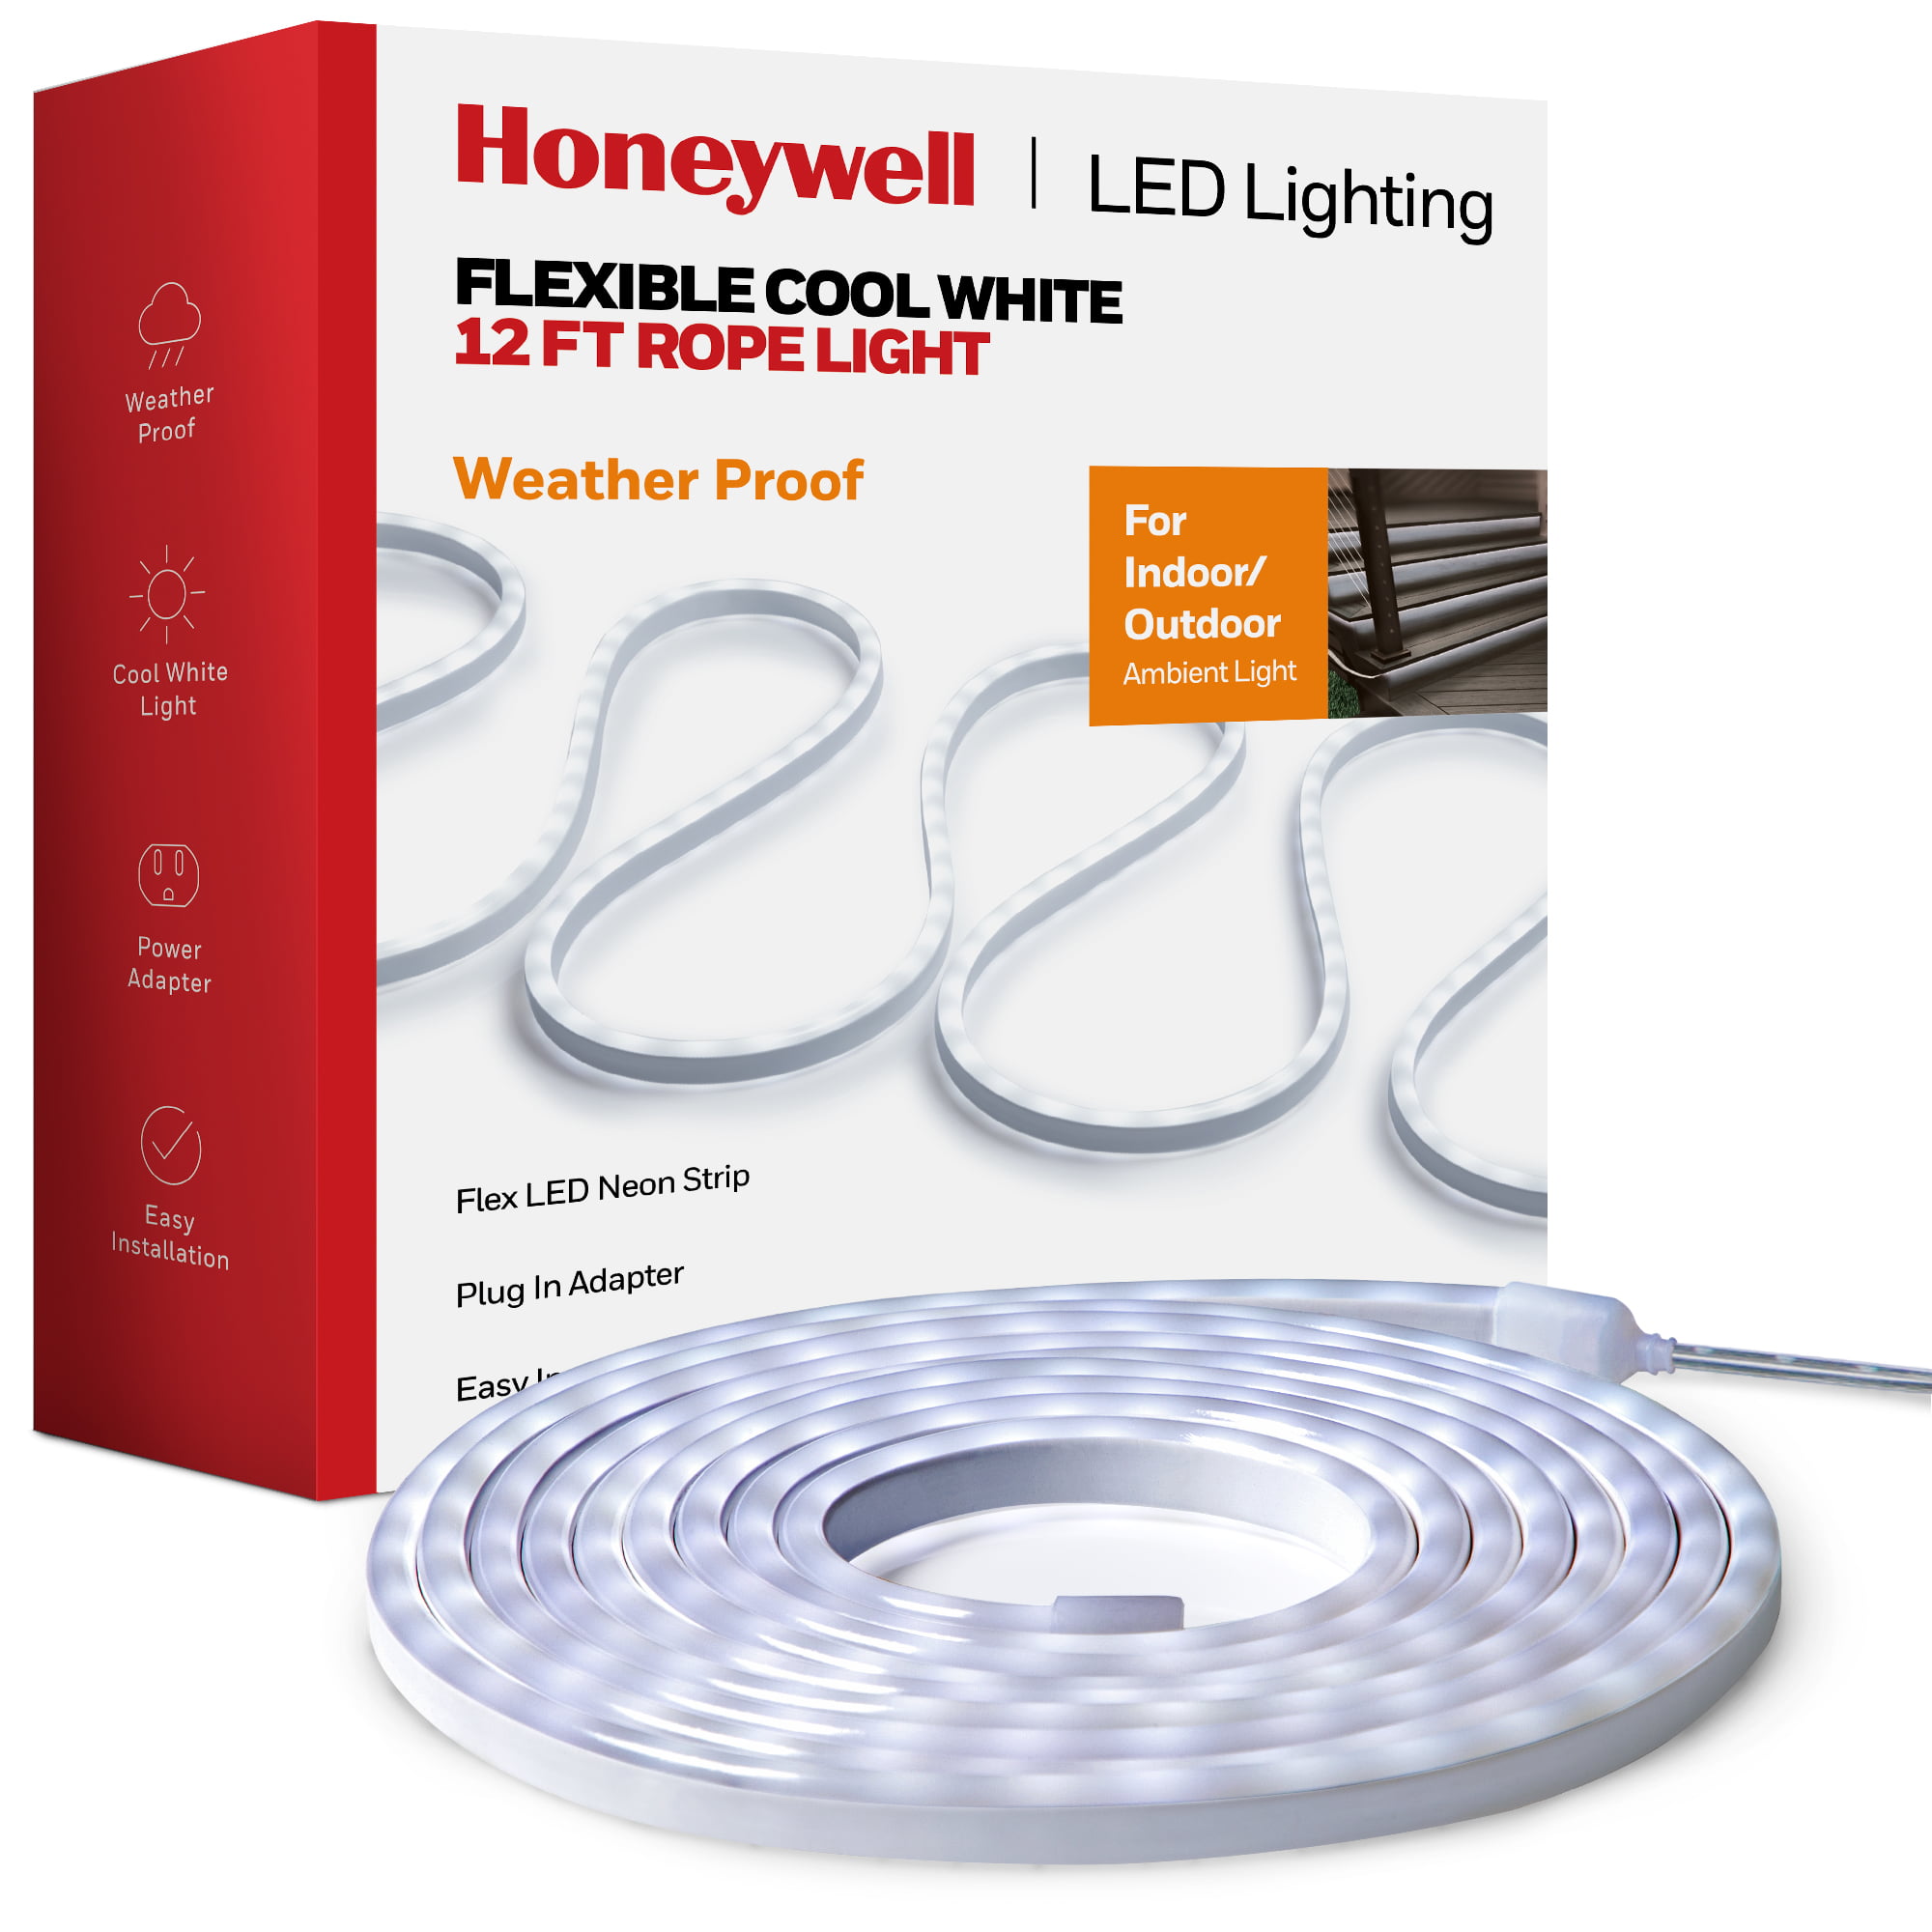 12' Honeywell Flexible Outdoor/Indoor LED Neon Rope Light w/ Power Adapter (Cool White) $9.95 + Free Shipping w/ Walmart+ or on $35+